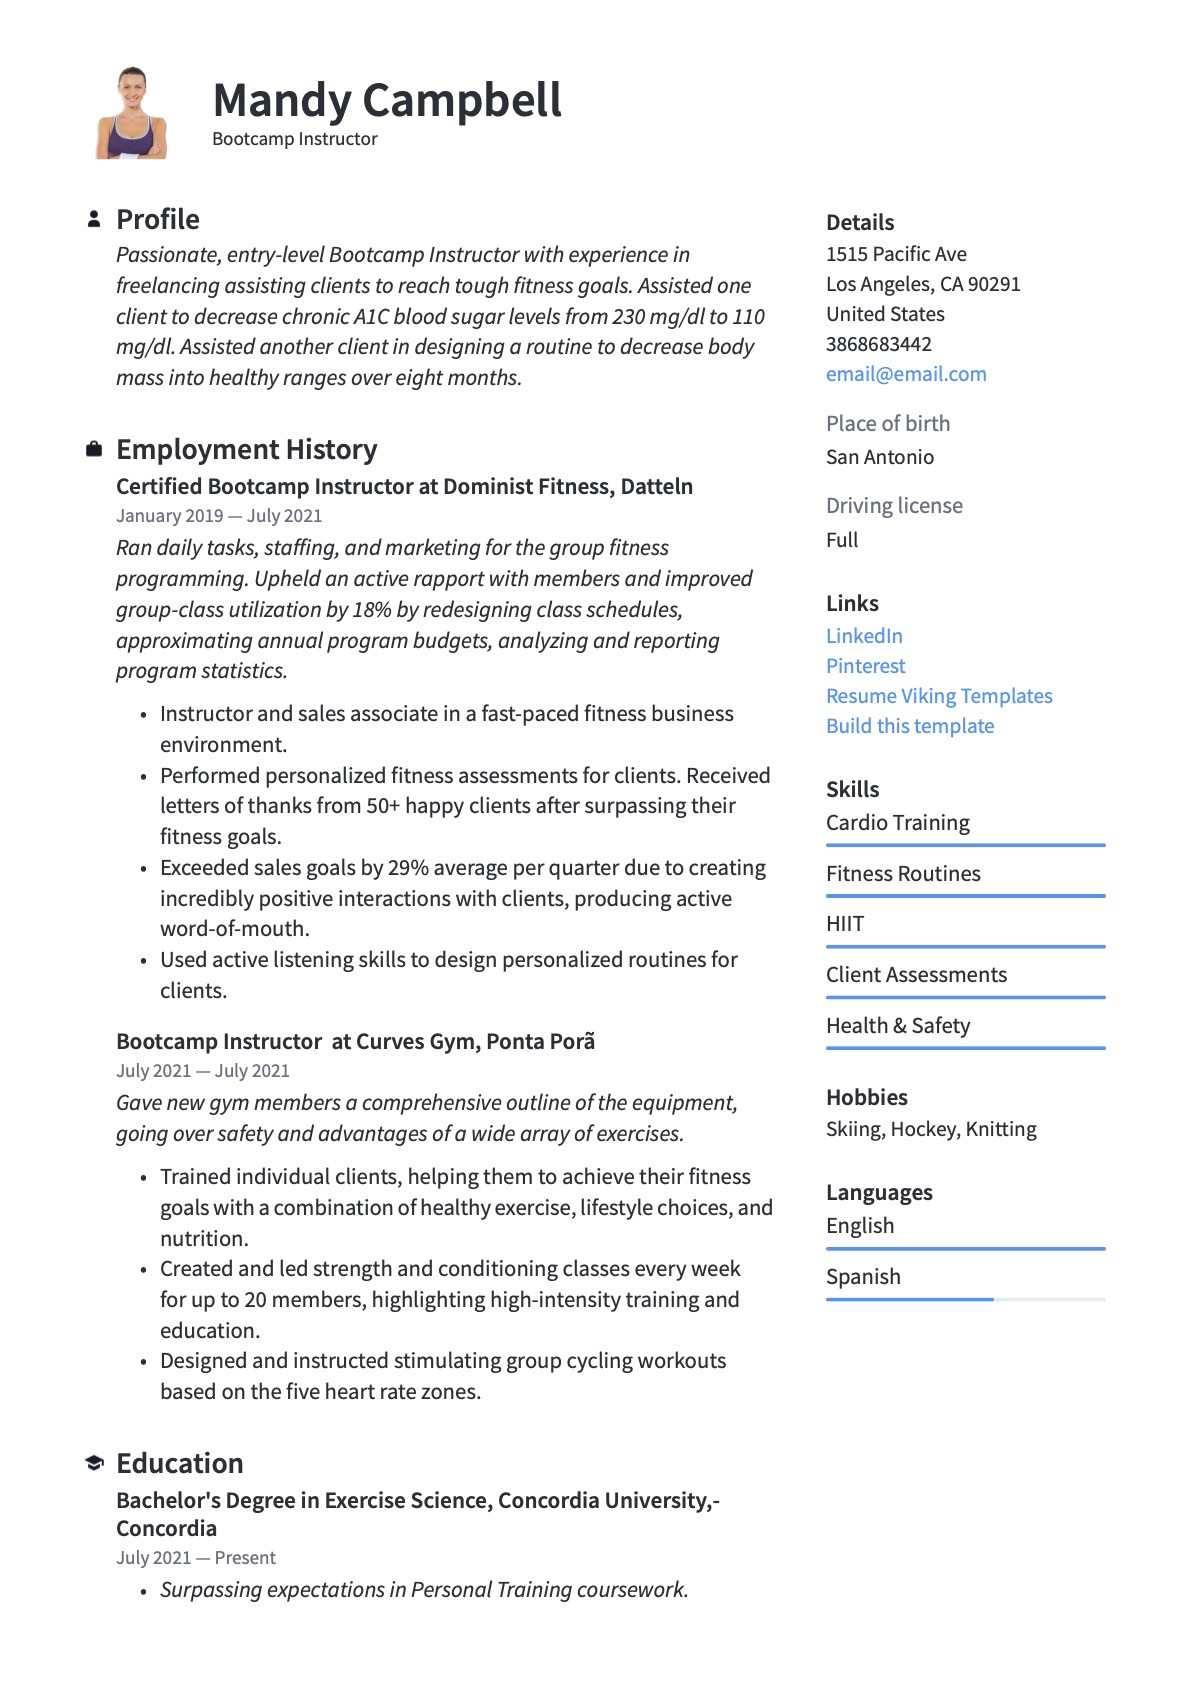 Sample Resume for A Site Inspector Training Instructor Bootcamp Instructor Resume & Guide 21 Templates 2022